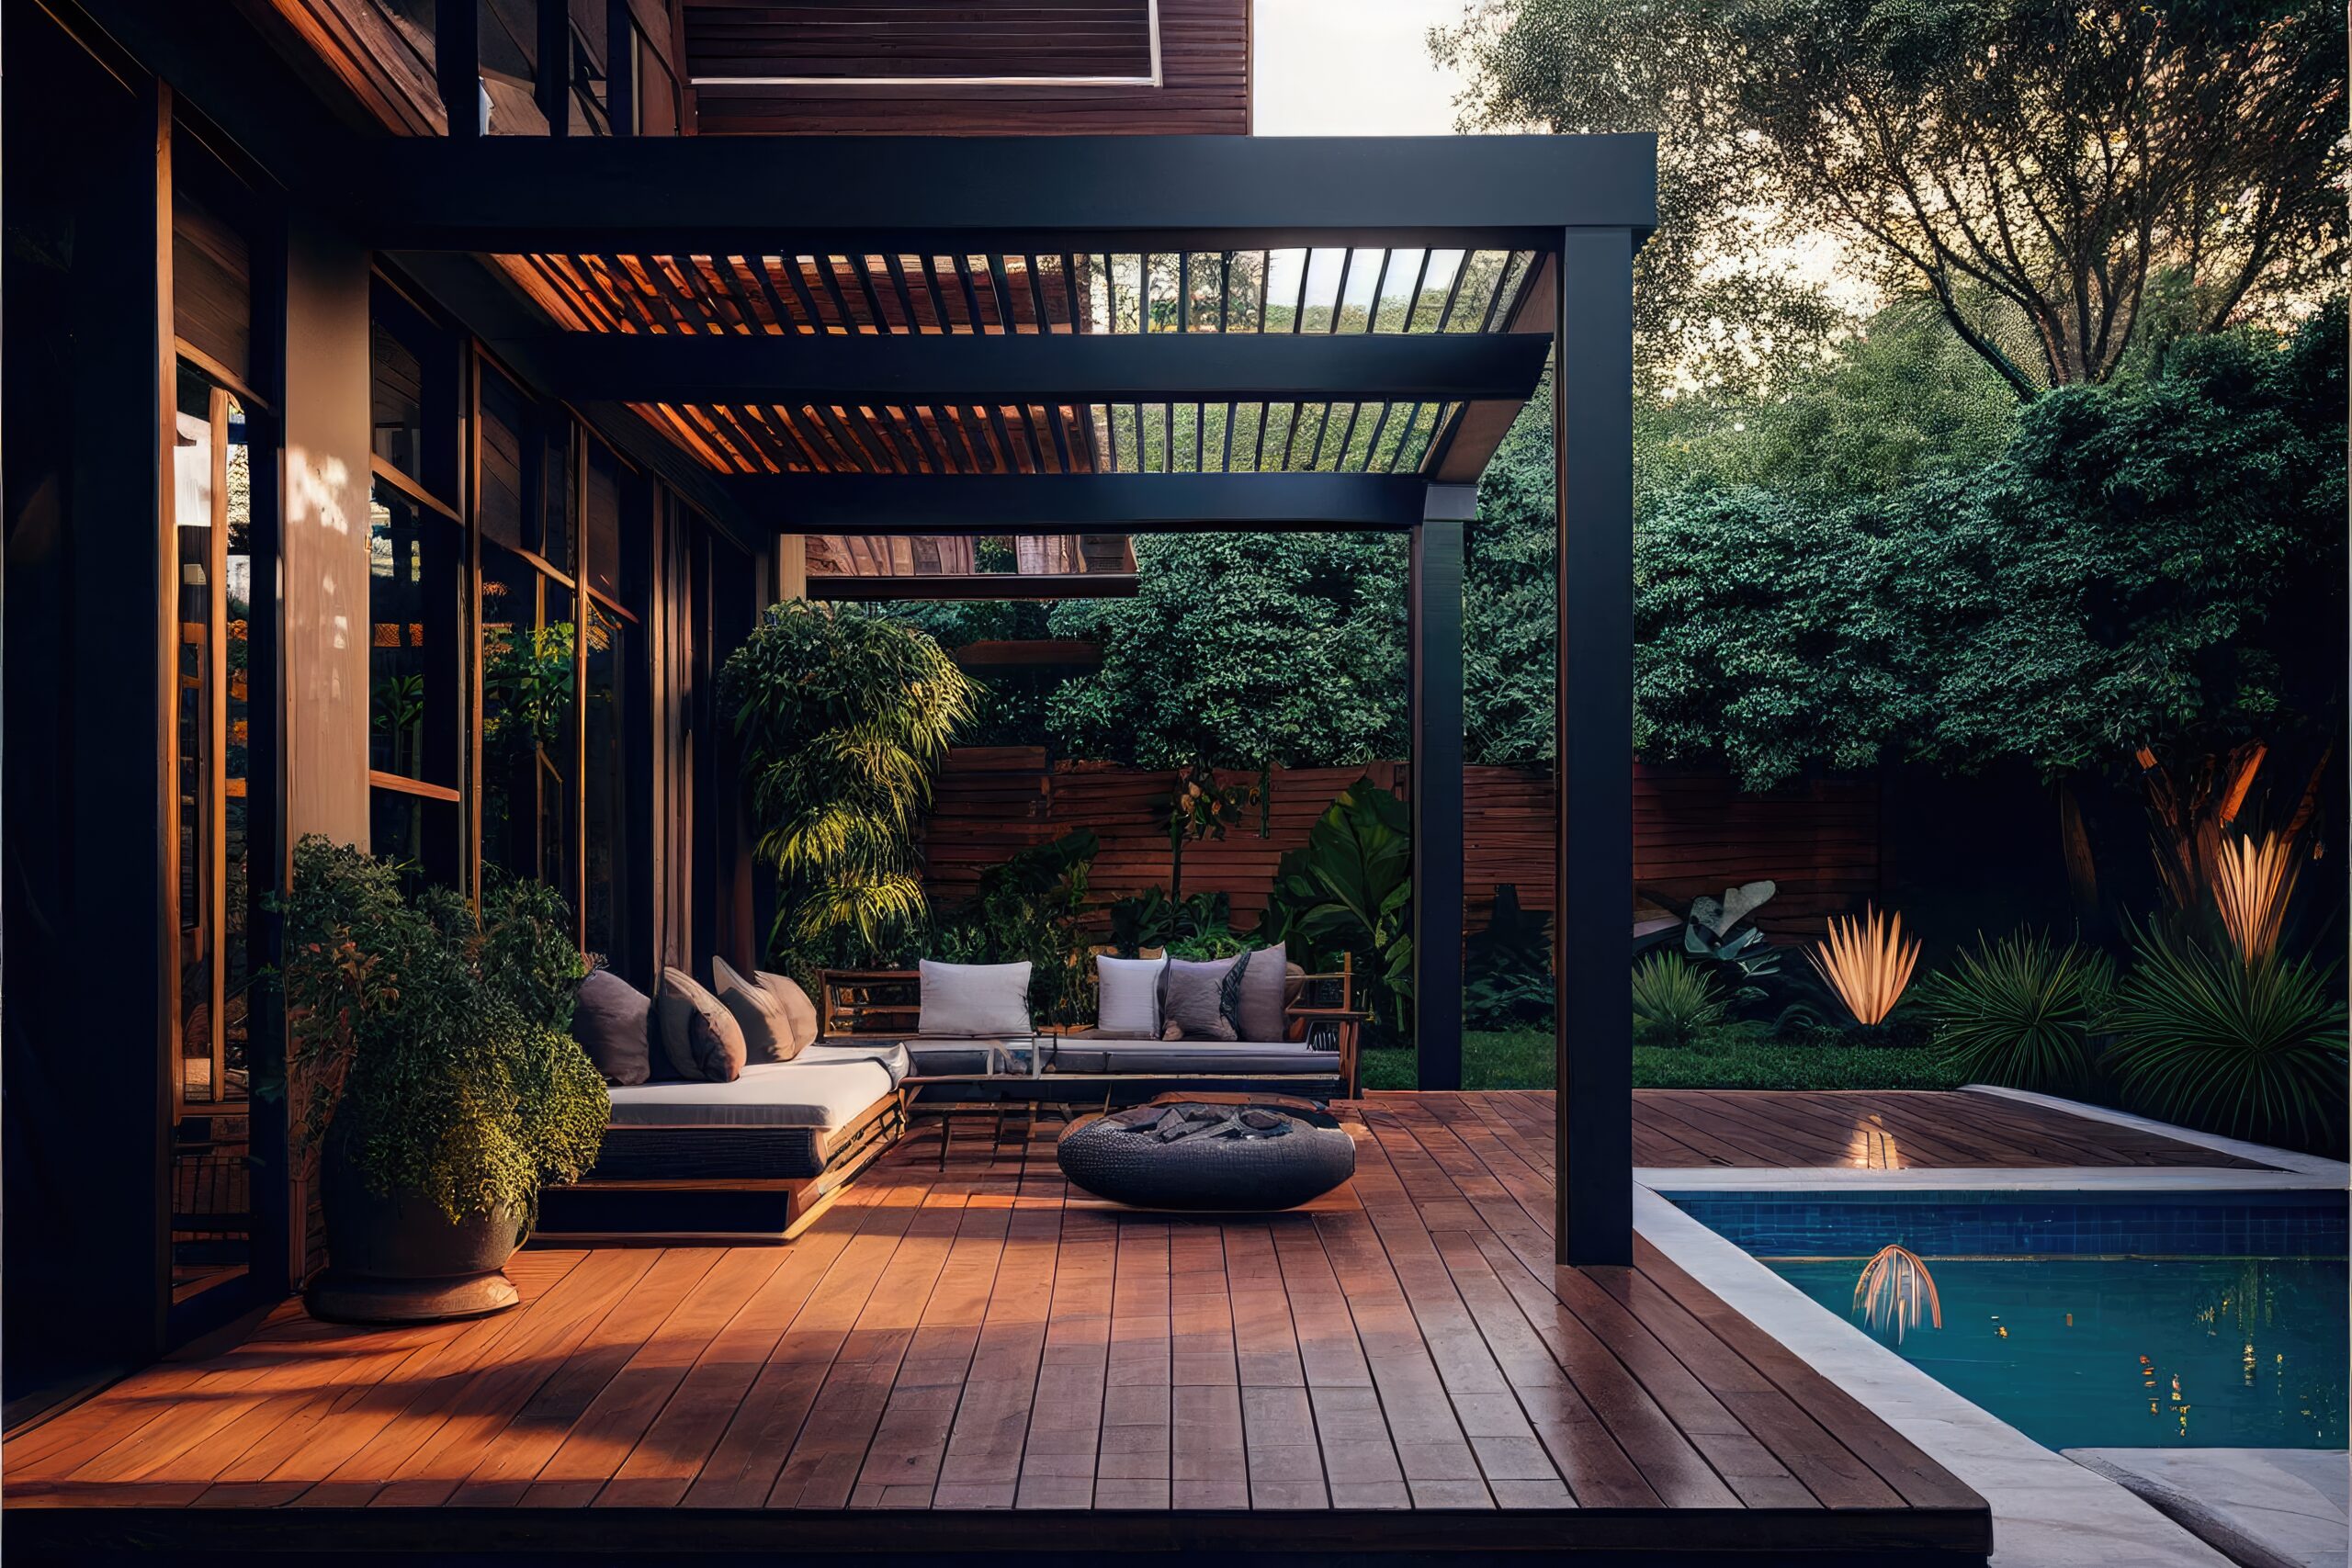 Backyard living space with outdoor furniture next to pool under